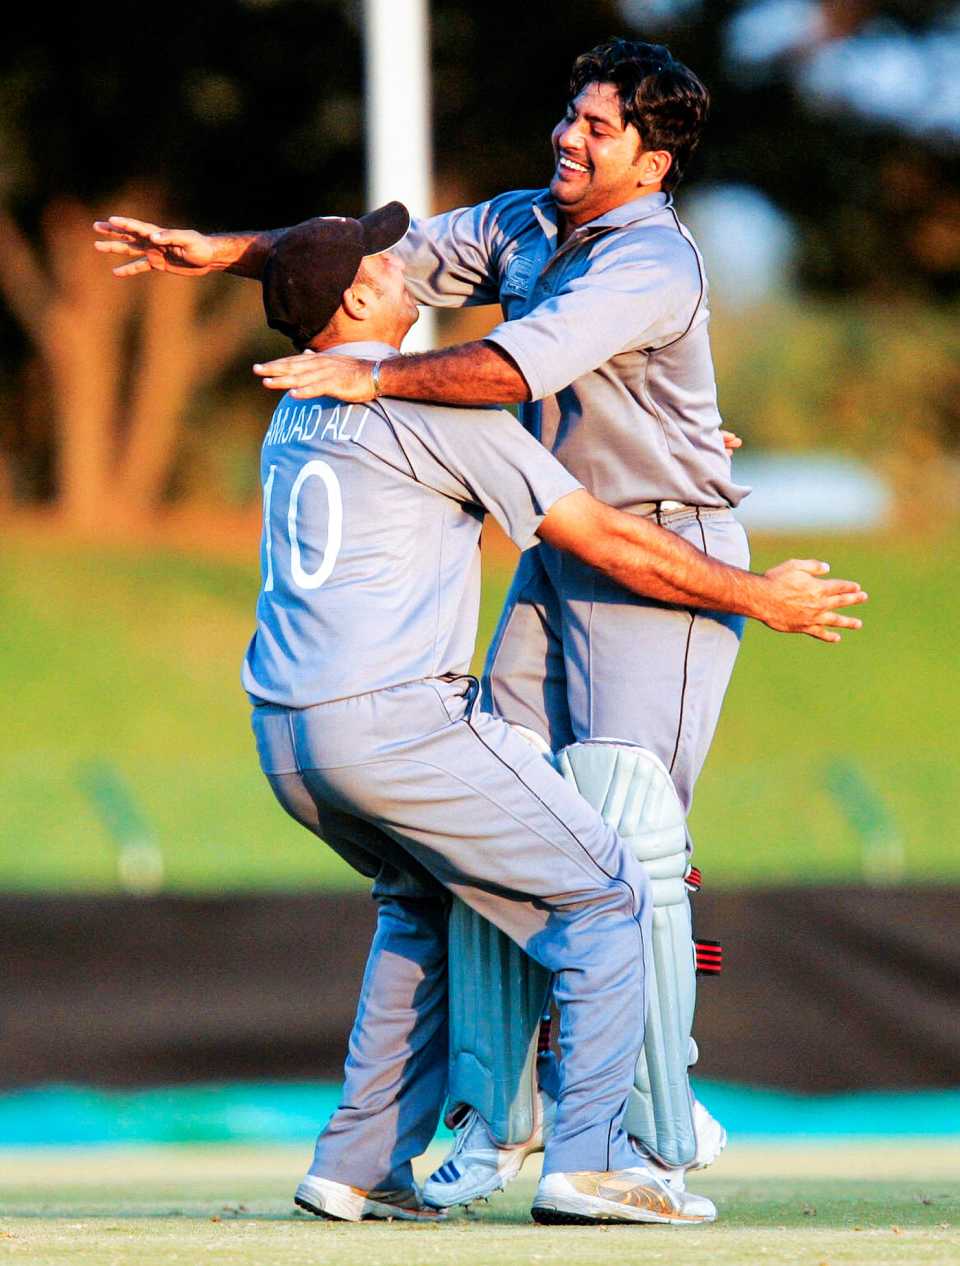 Fayyaz Ahmed is congratulated by team-mate Amjad Ali for scoring the winning runs, Netherlands v United Arab Emirates, ICC World Cup Qualifiers, Potchefstroom, April 4, 2009
